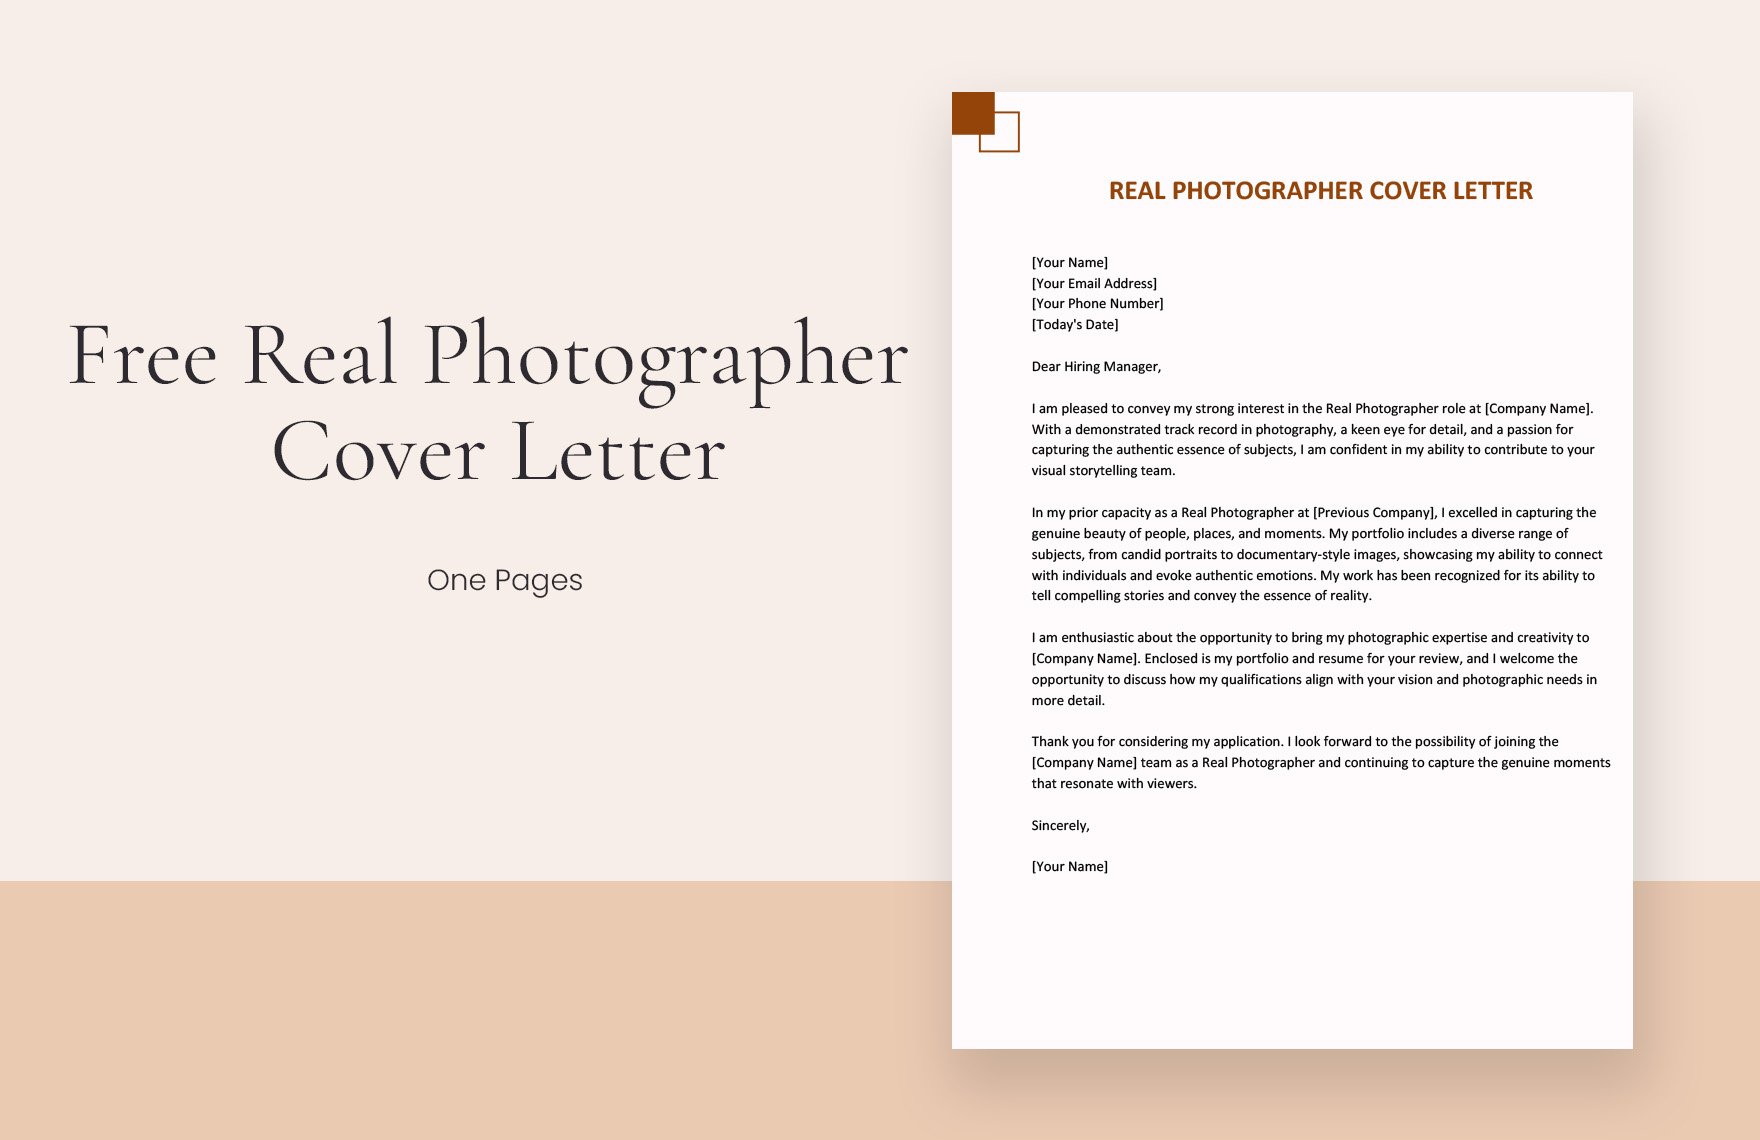 Real Photographer Cover Letter in Word, Google Docs